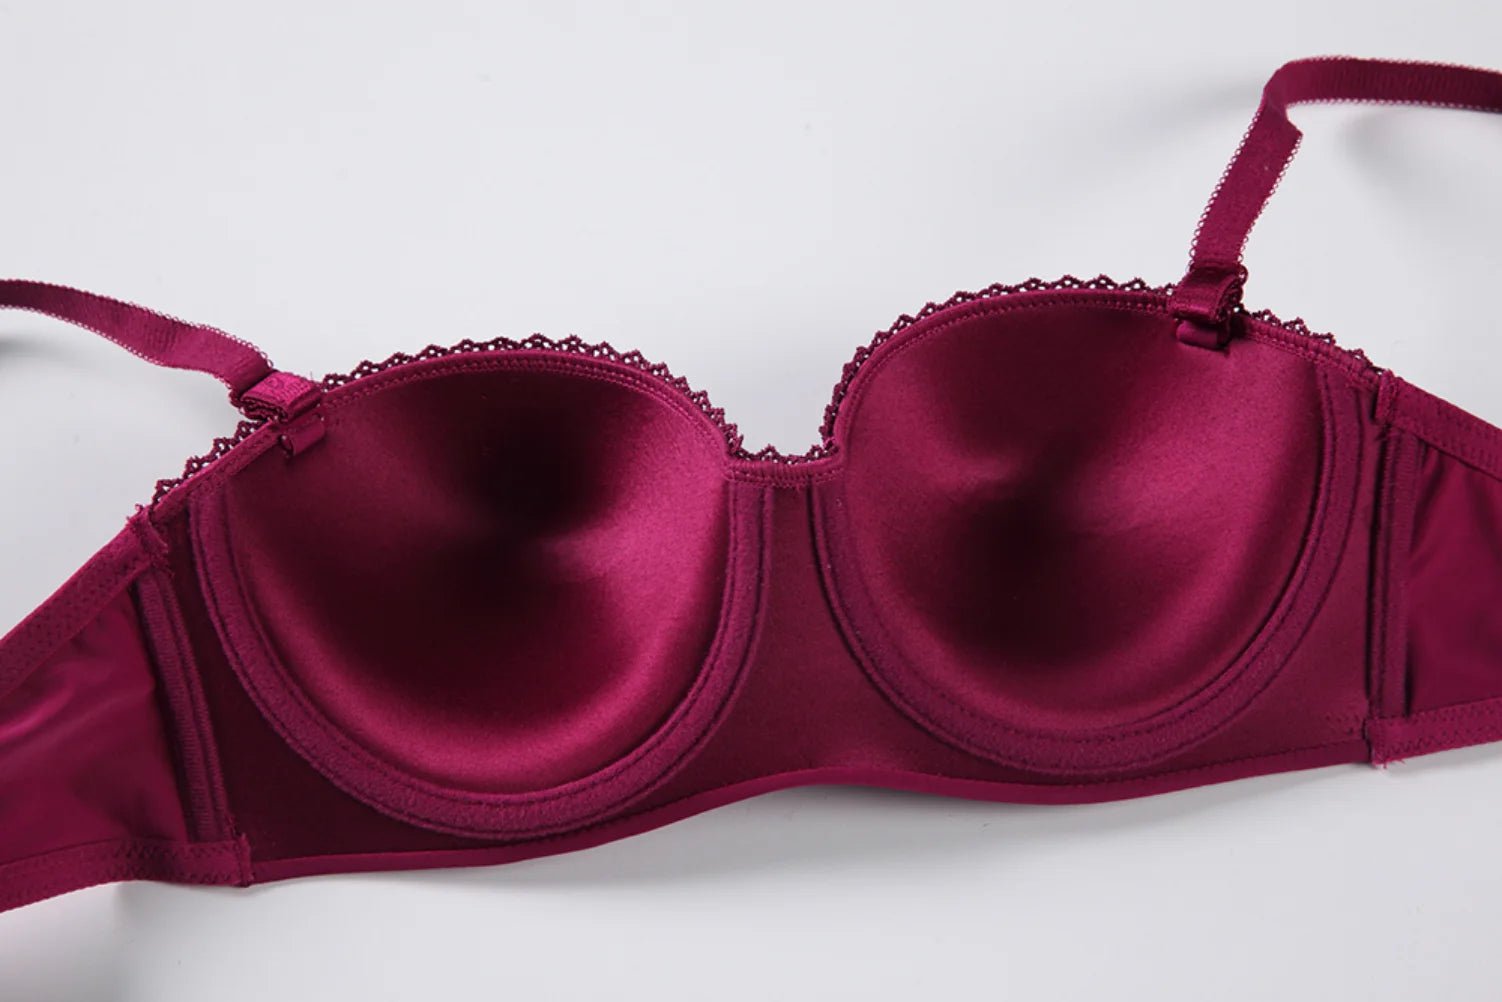 BINNYS Strapless Bra: B Cup, High-Quality Solid Nylon, Breathable, Half Cup, Ladies Underwire